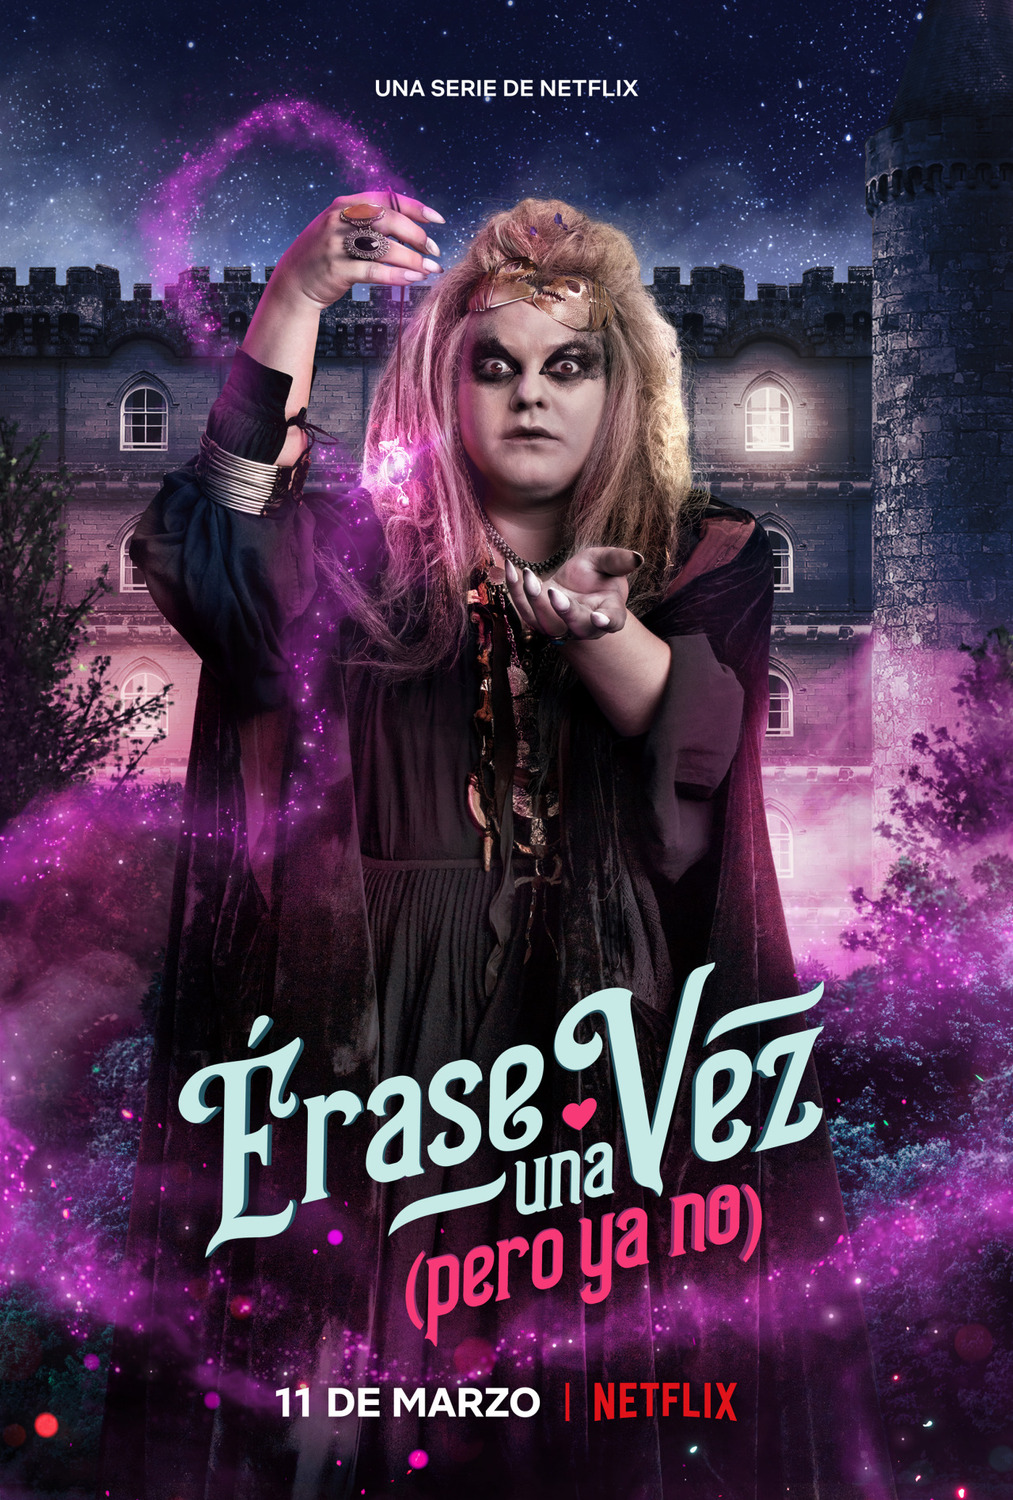 Extra Large TV Poster Image for Érase una vez... pero ya no (#5 of 5)